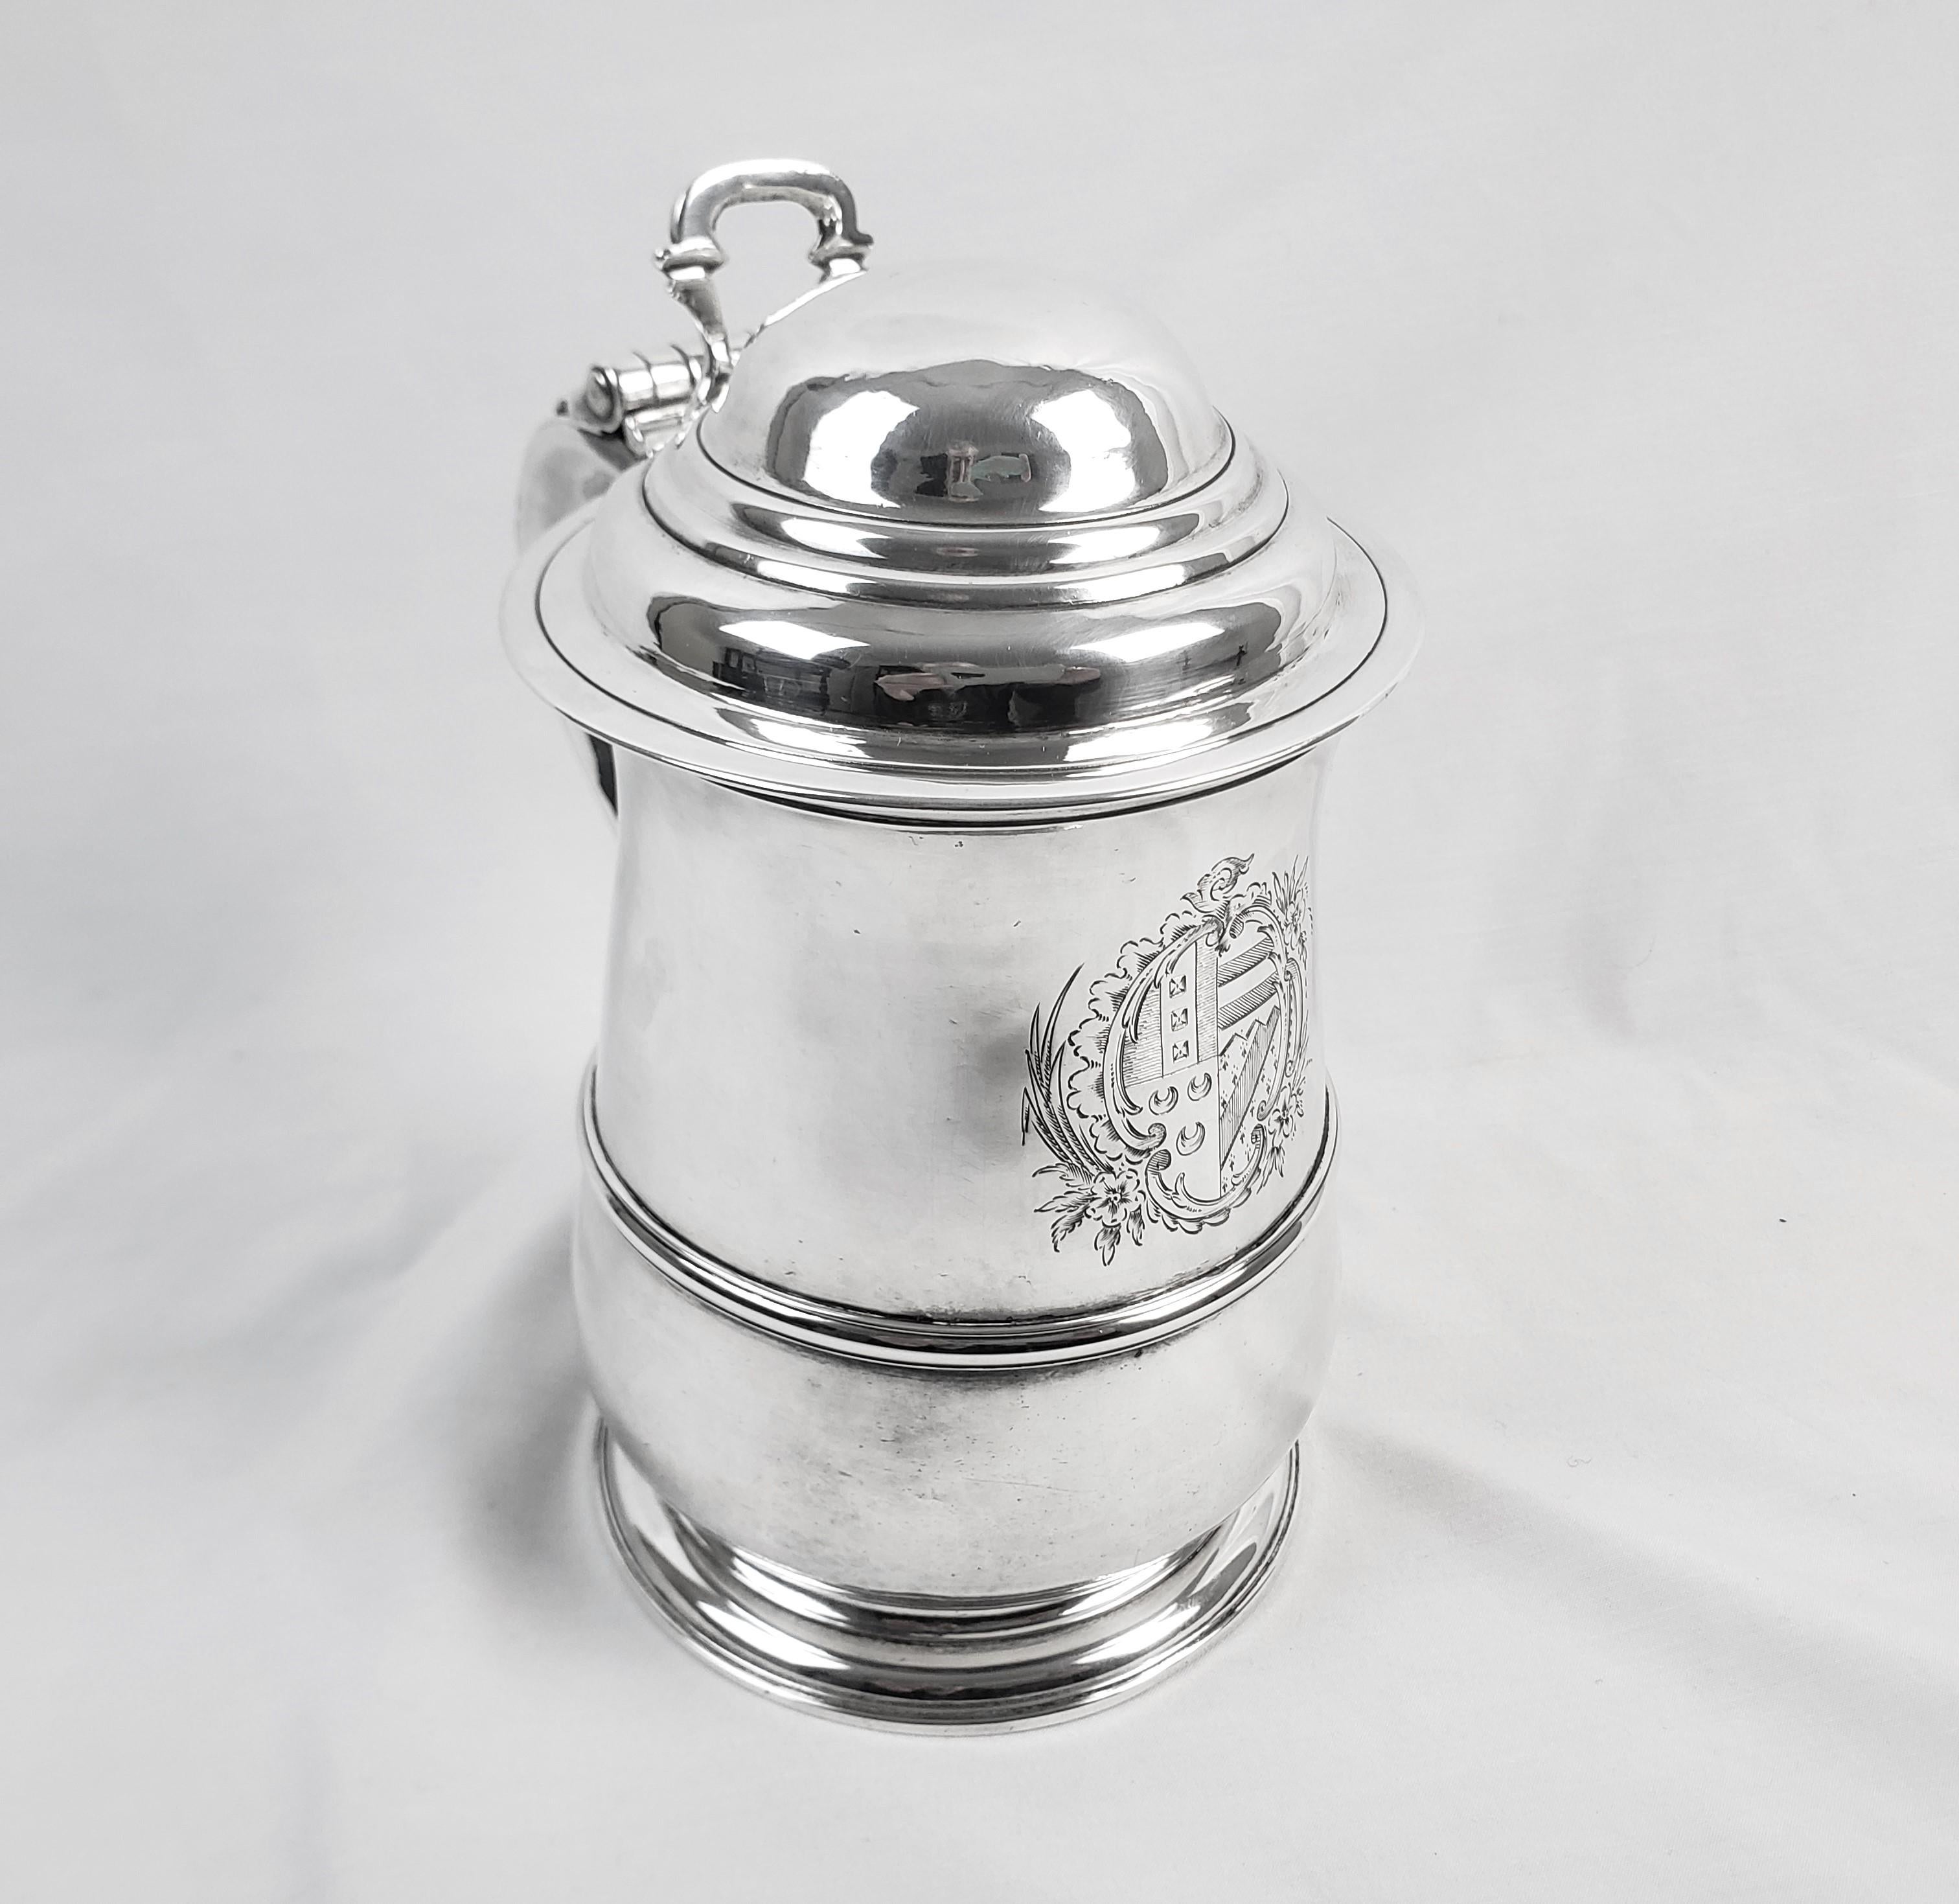 This large and substantial antique tankard is hallmarked by an unknown maker and originated from England, dating to approximately 1740 and done in the period George 3rd style. The tankard is composed of sterling silver with an engraved crest on the